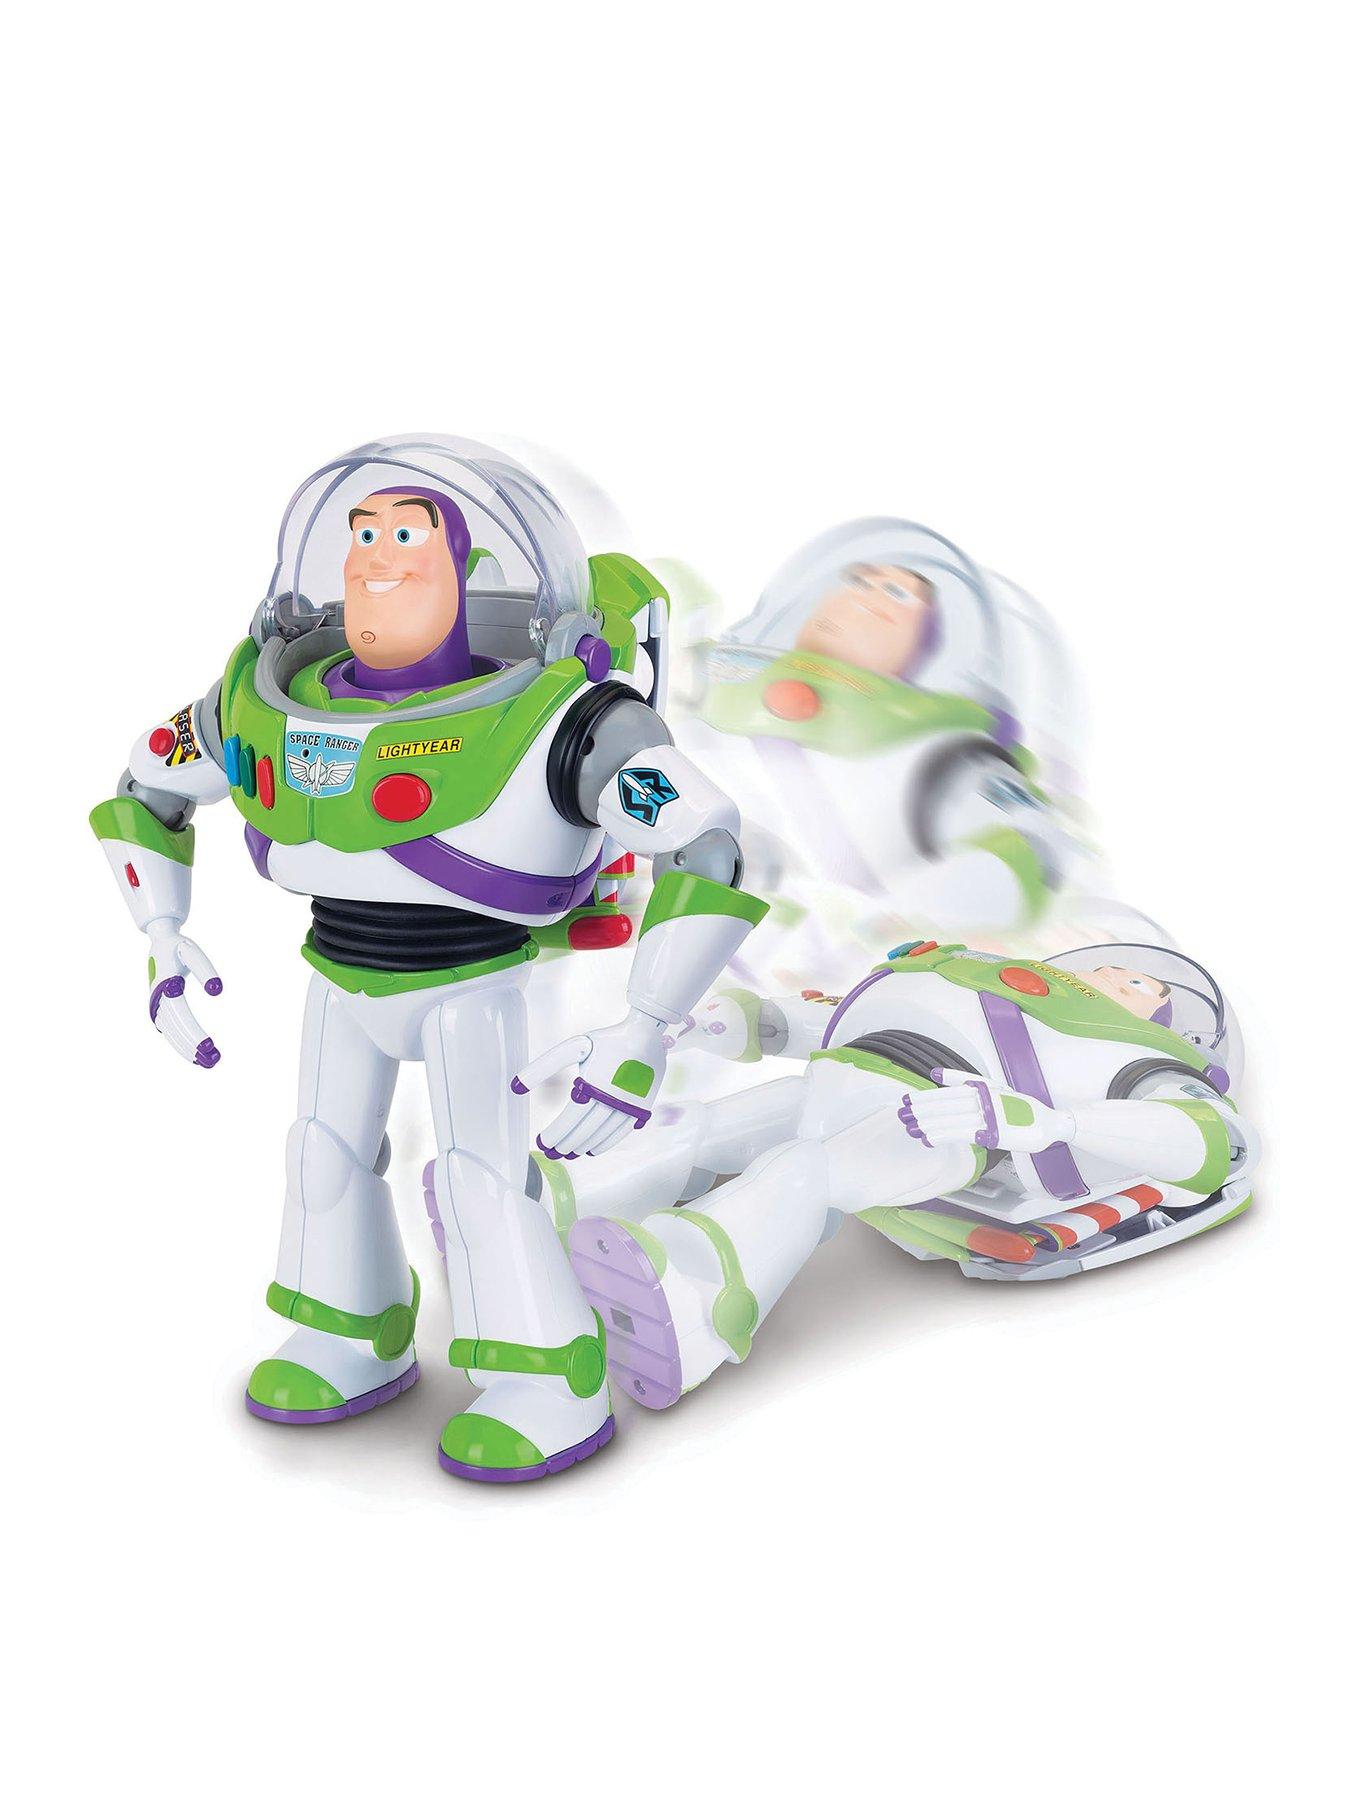 Details about   Disney Pixar Buzz Lightyear Action Figure Toy Story Vintage  